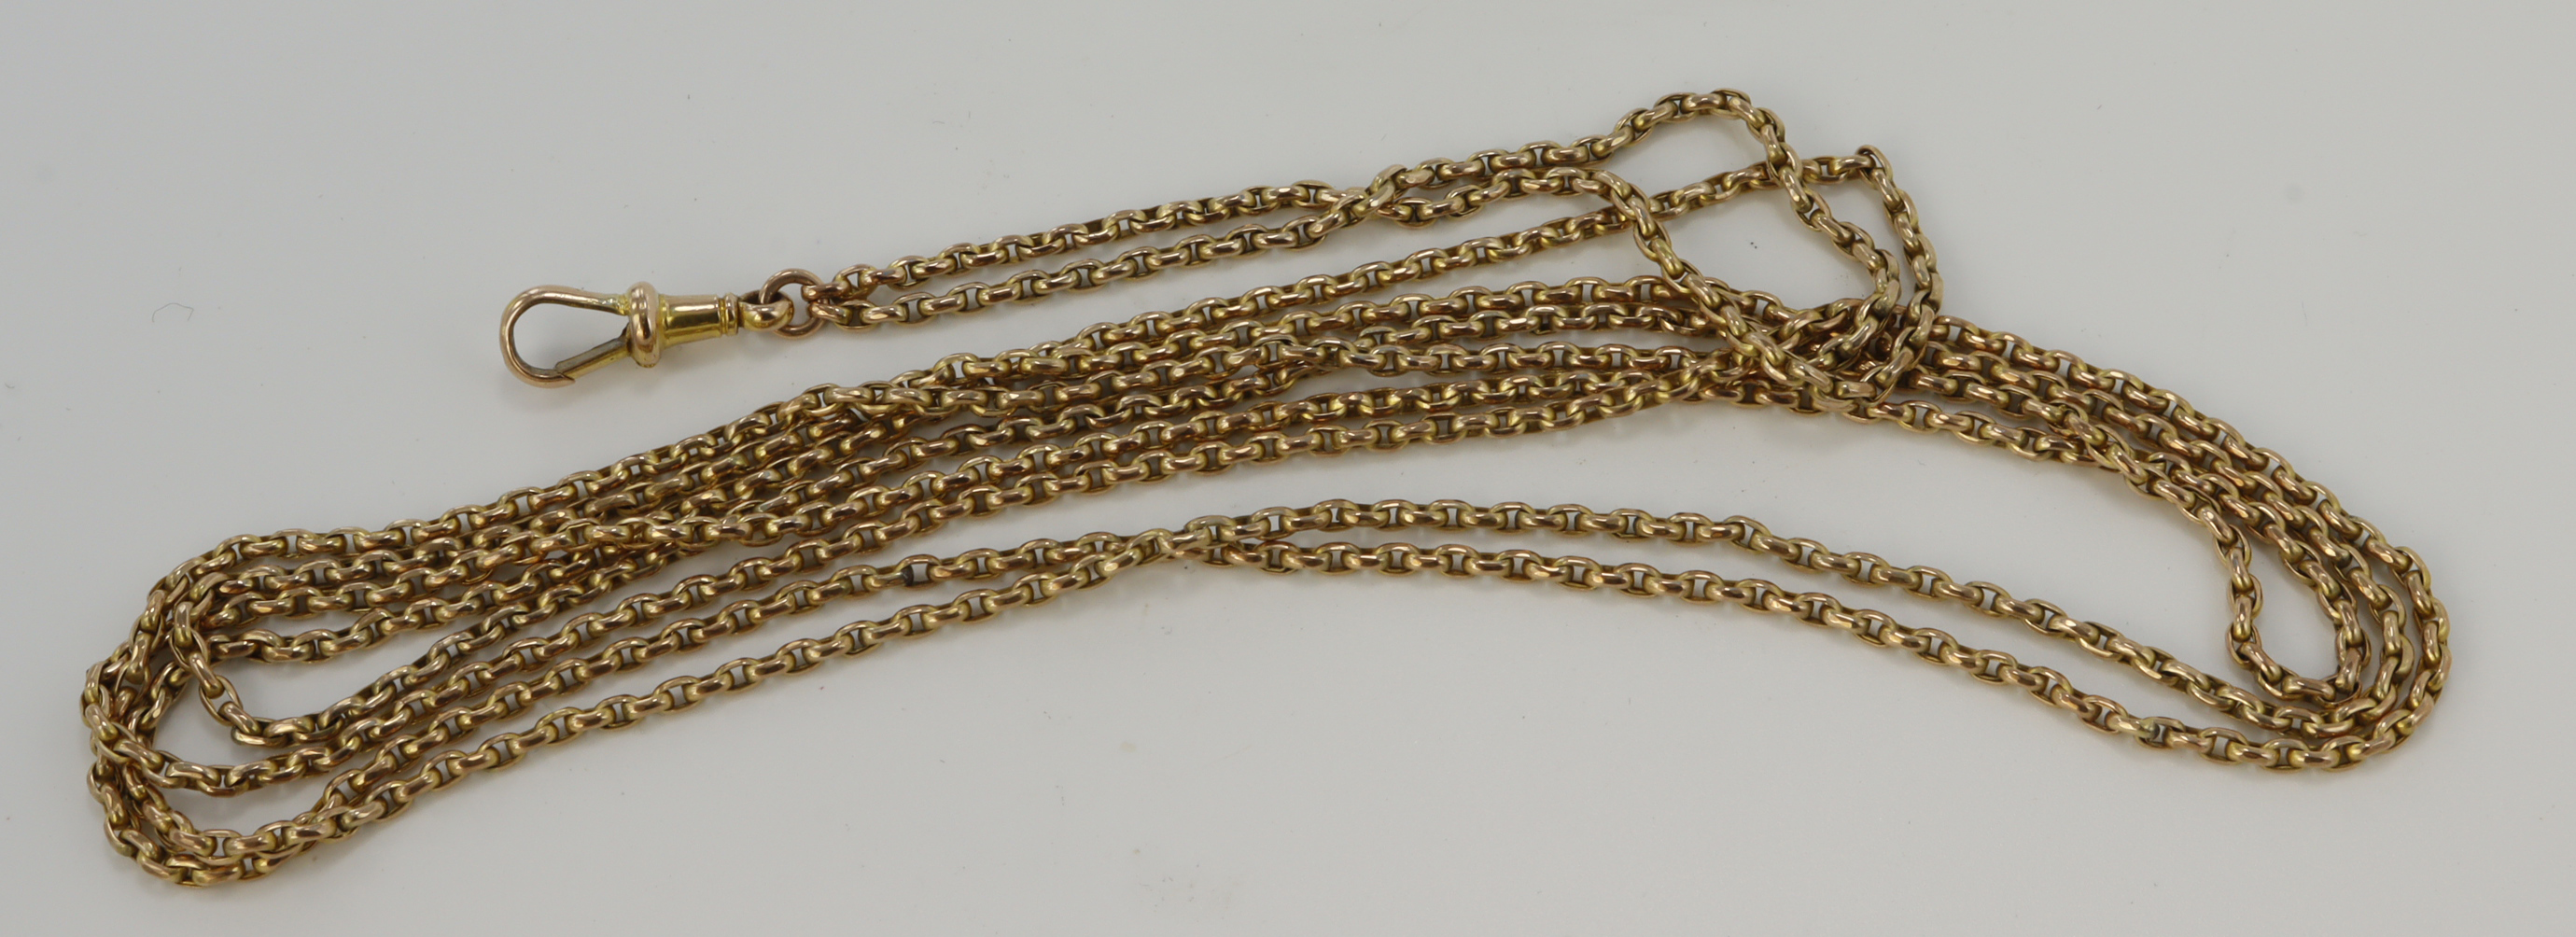 9ct yellow gold antique muff chain, link width 2mm, length 56", one dog clip fitting, weight 18.4g.